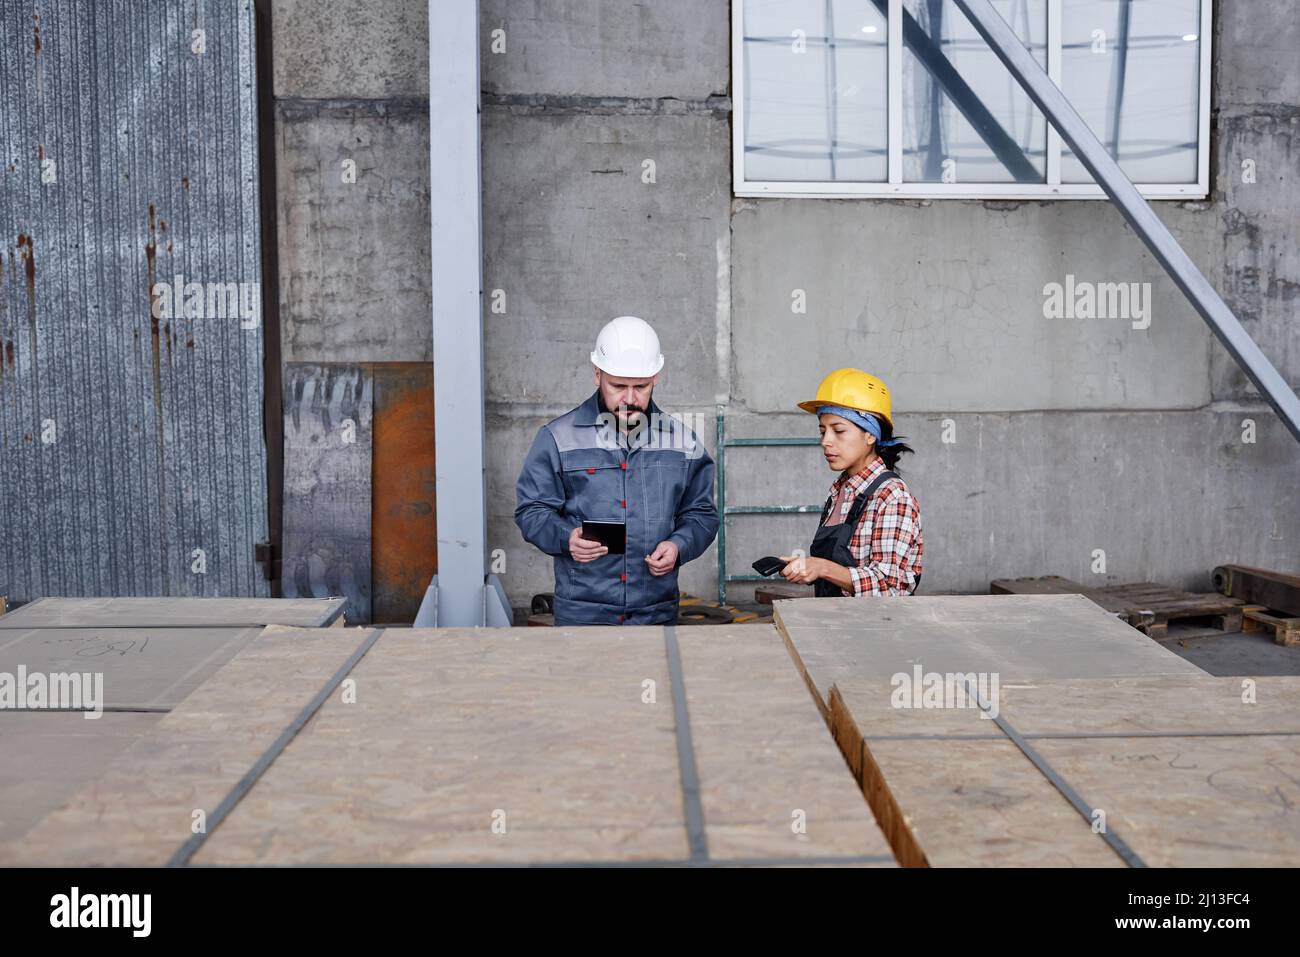 Two workers of distribution warehouse checking barcodes on containers with new spare parts for contemporary industrial machines Stock Photo